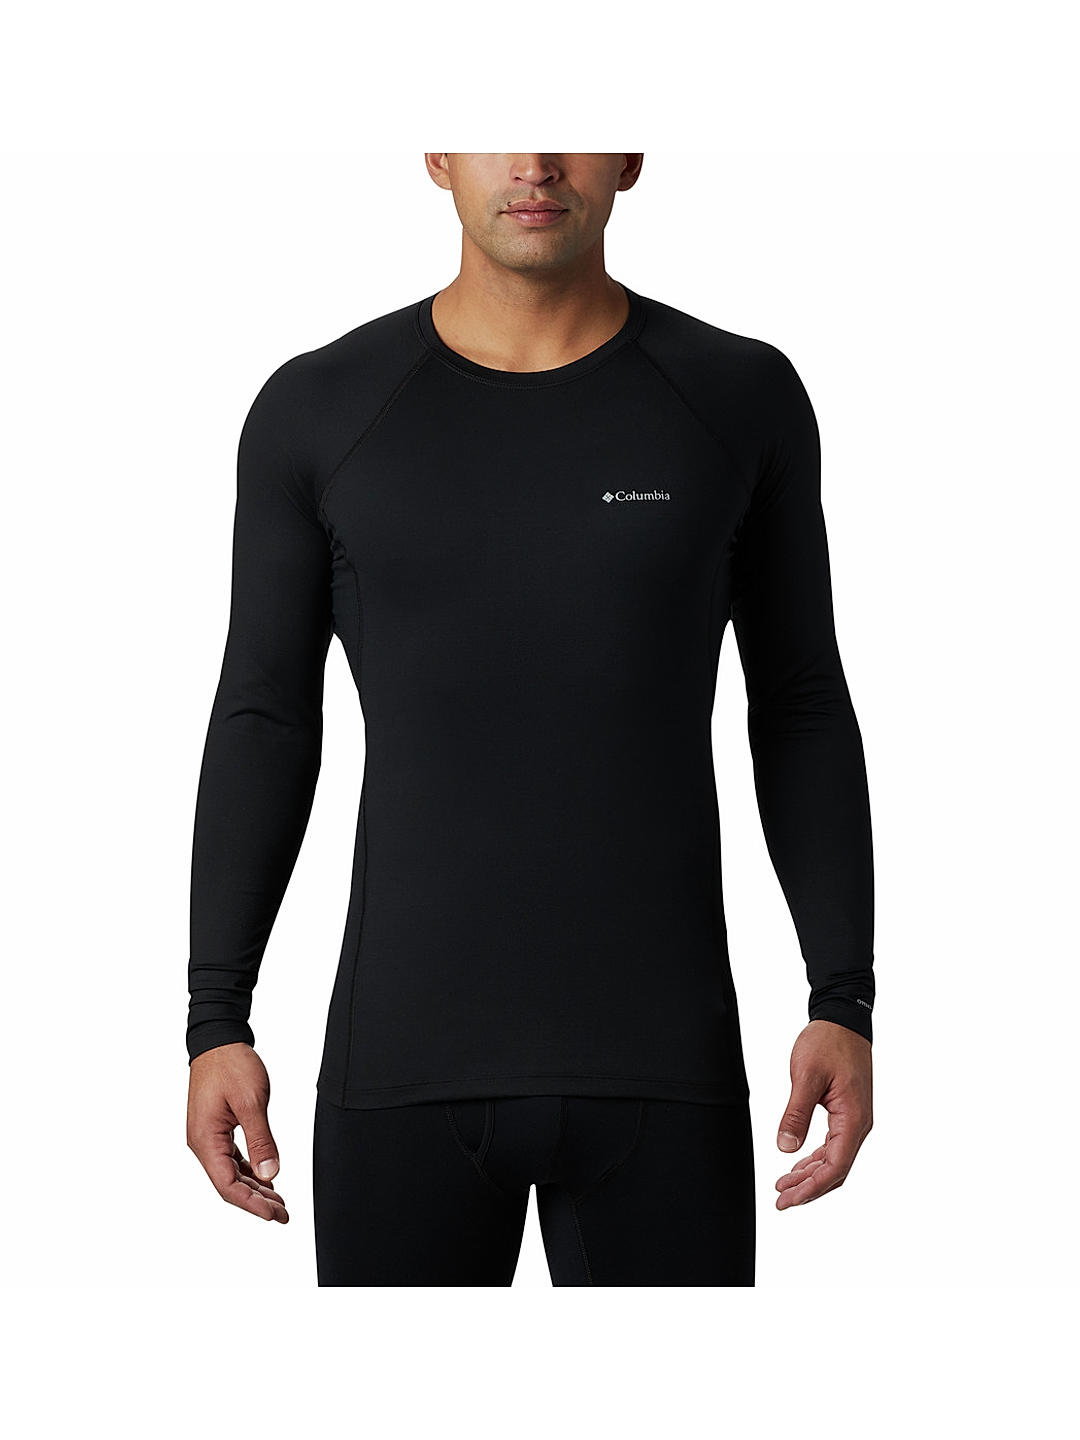 Buy Black Heavyweight Stretch Long Sleeve Top for Men Online at